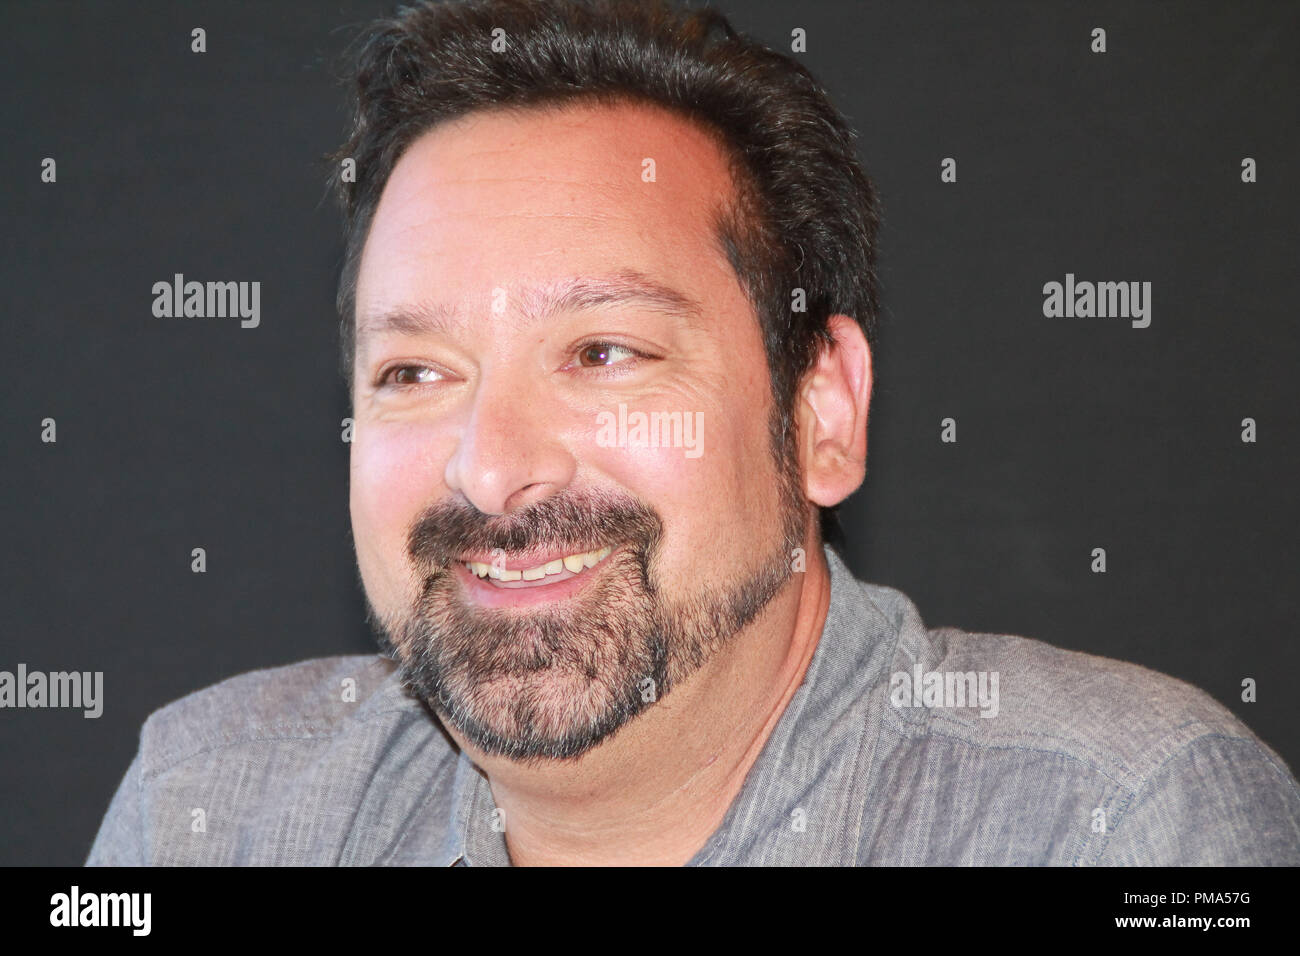 Director James Mangold 'The Wolverine' Portrait Session, July 10, 2013. Reproduction by American tabloids is absolutely forbidden. File Reference # 32032 031JRC  For Editorial Use Only -  All Rights Reserved Stock Photo